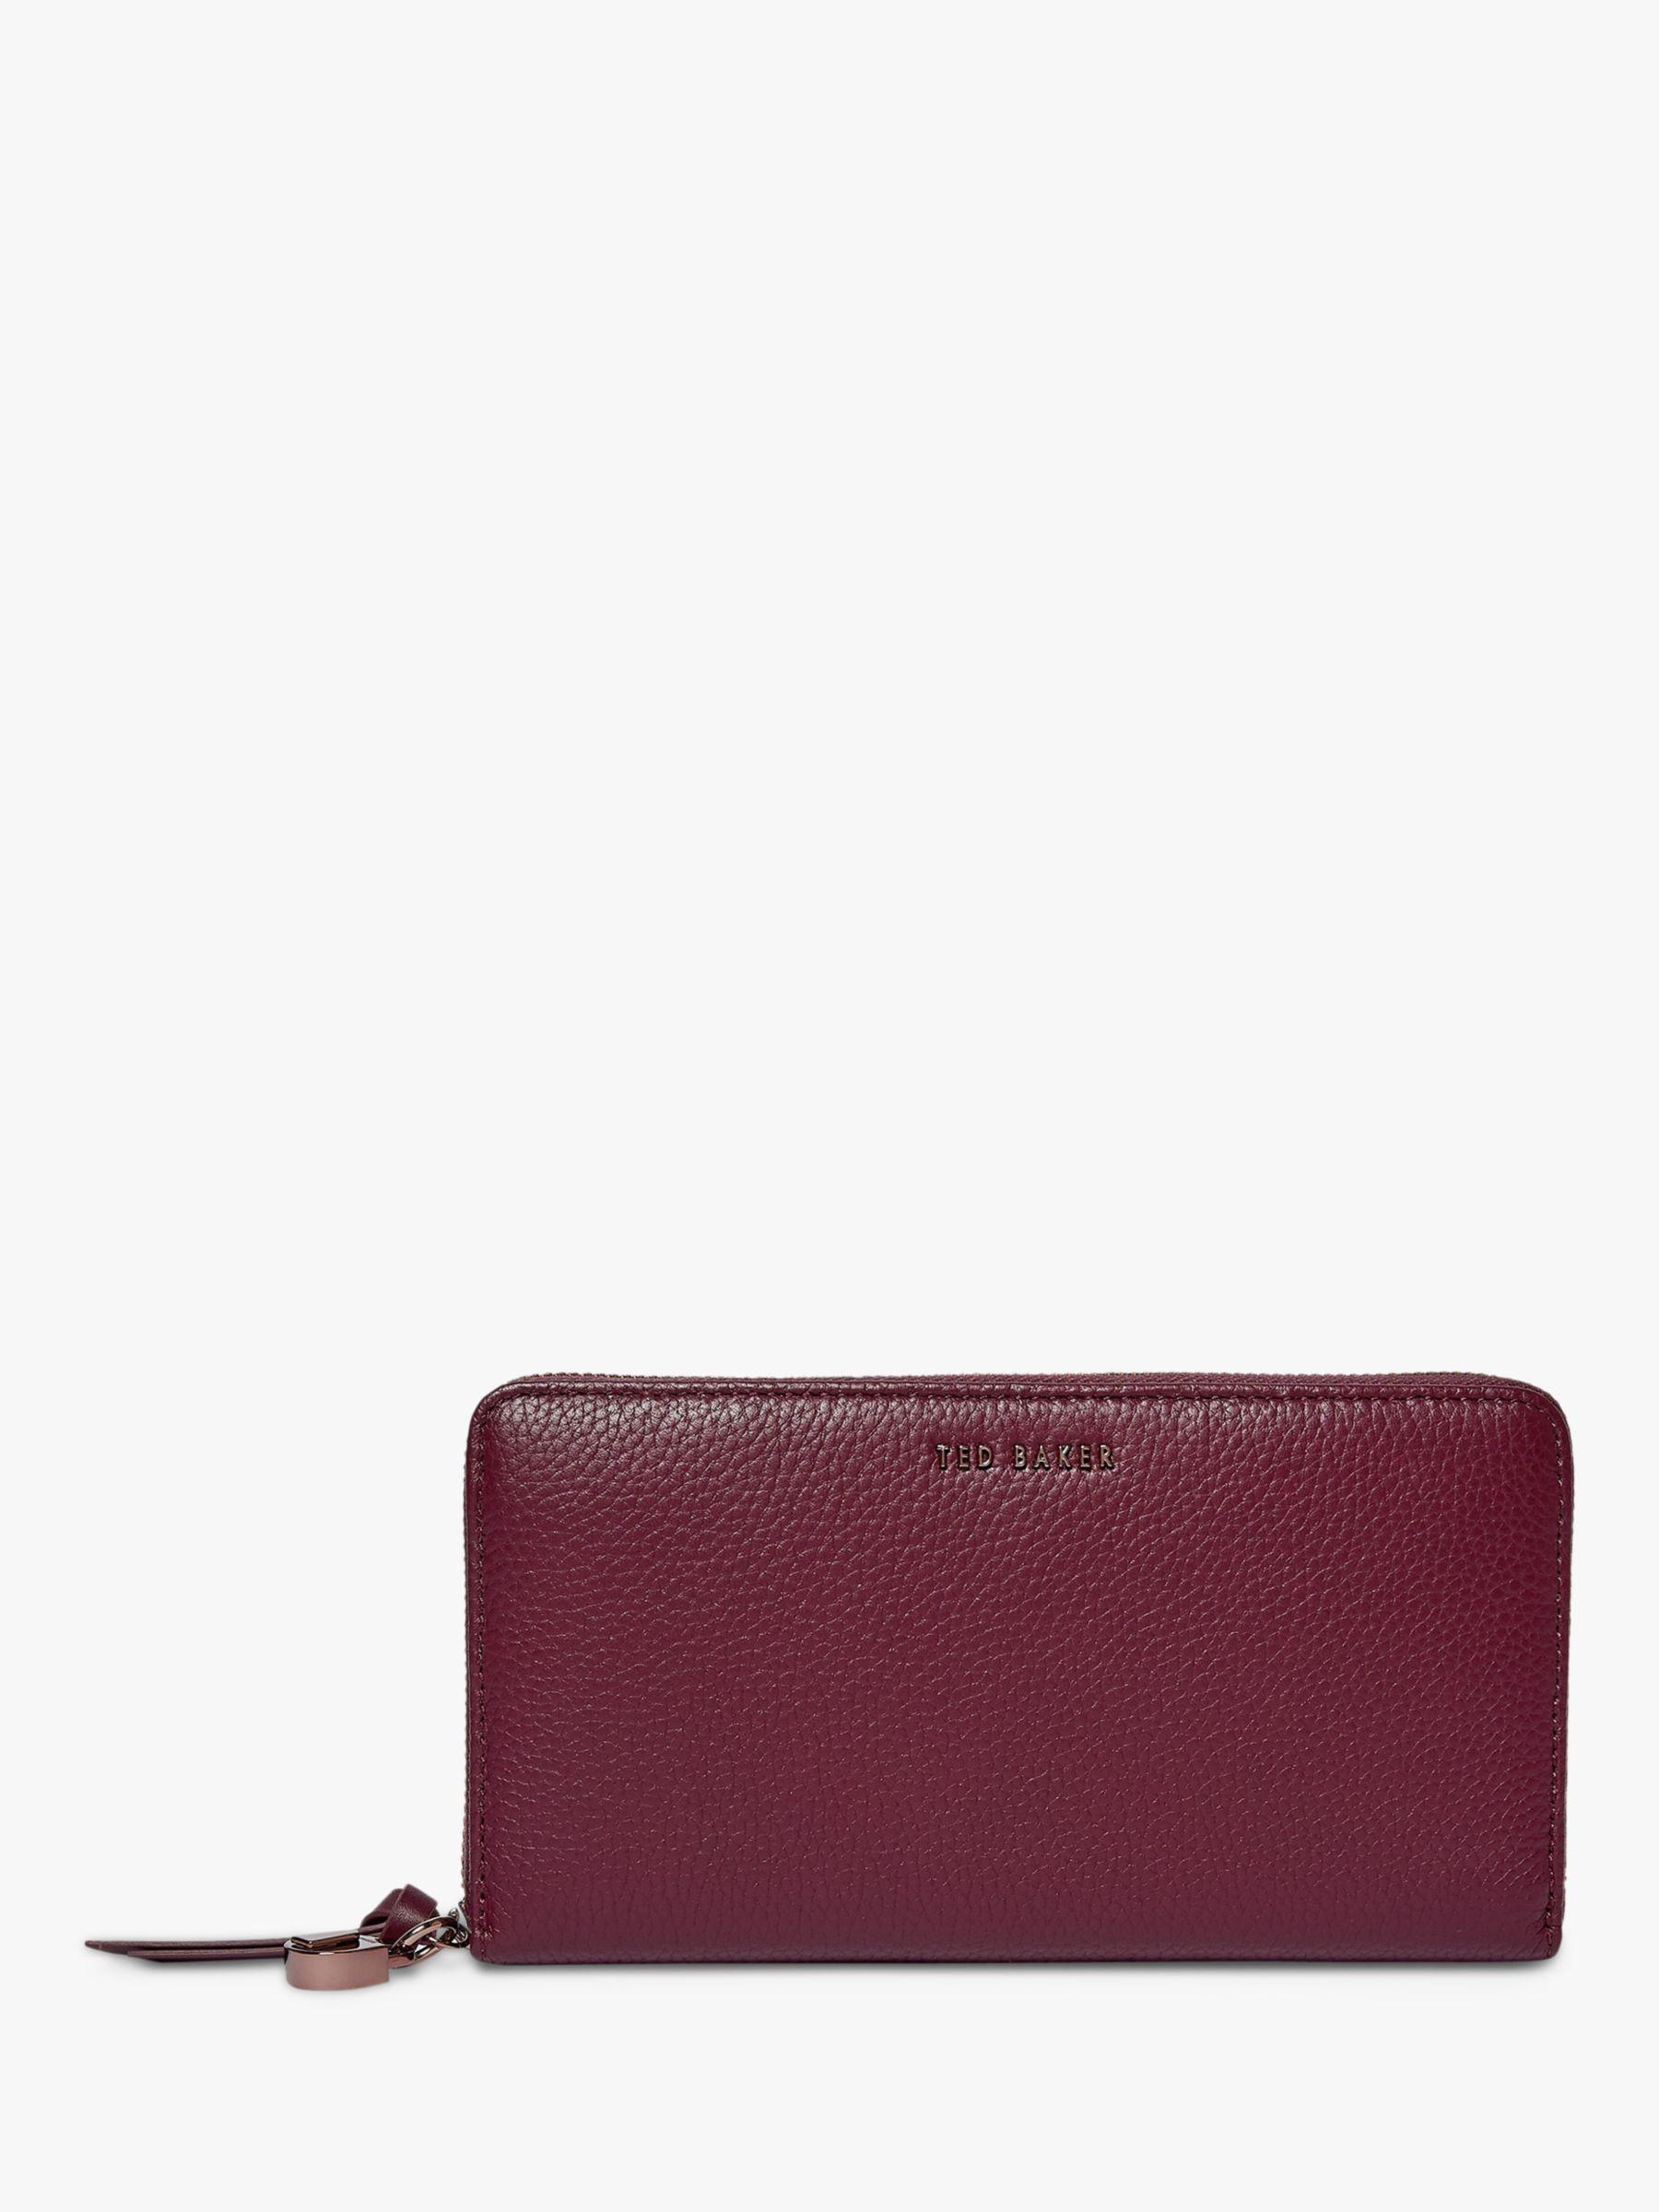 Cheap Ted Baker Purple Rosyela Purse | Soletrader Outlet